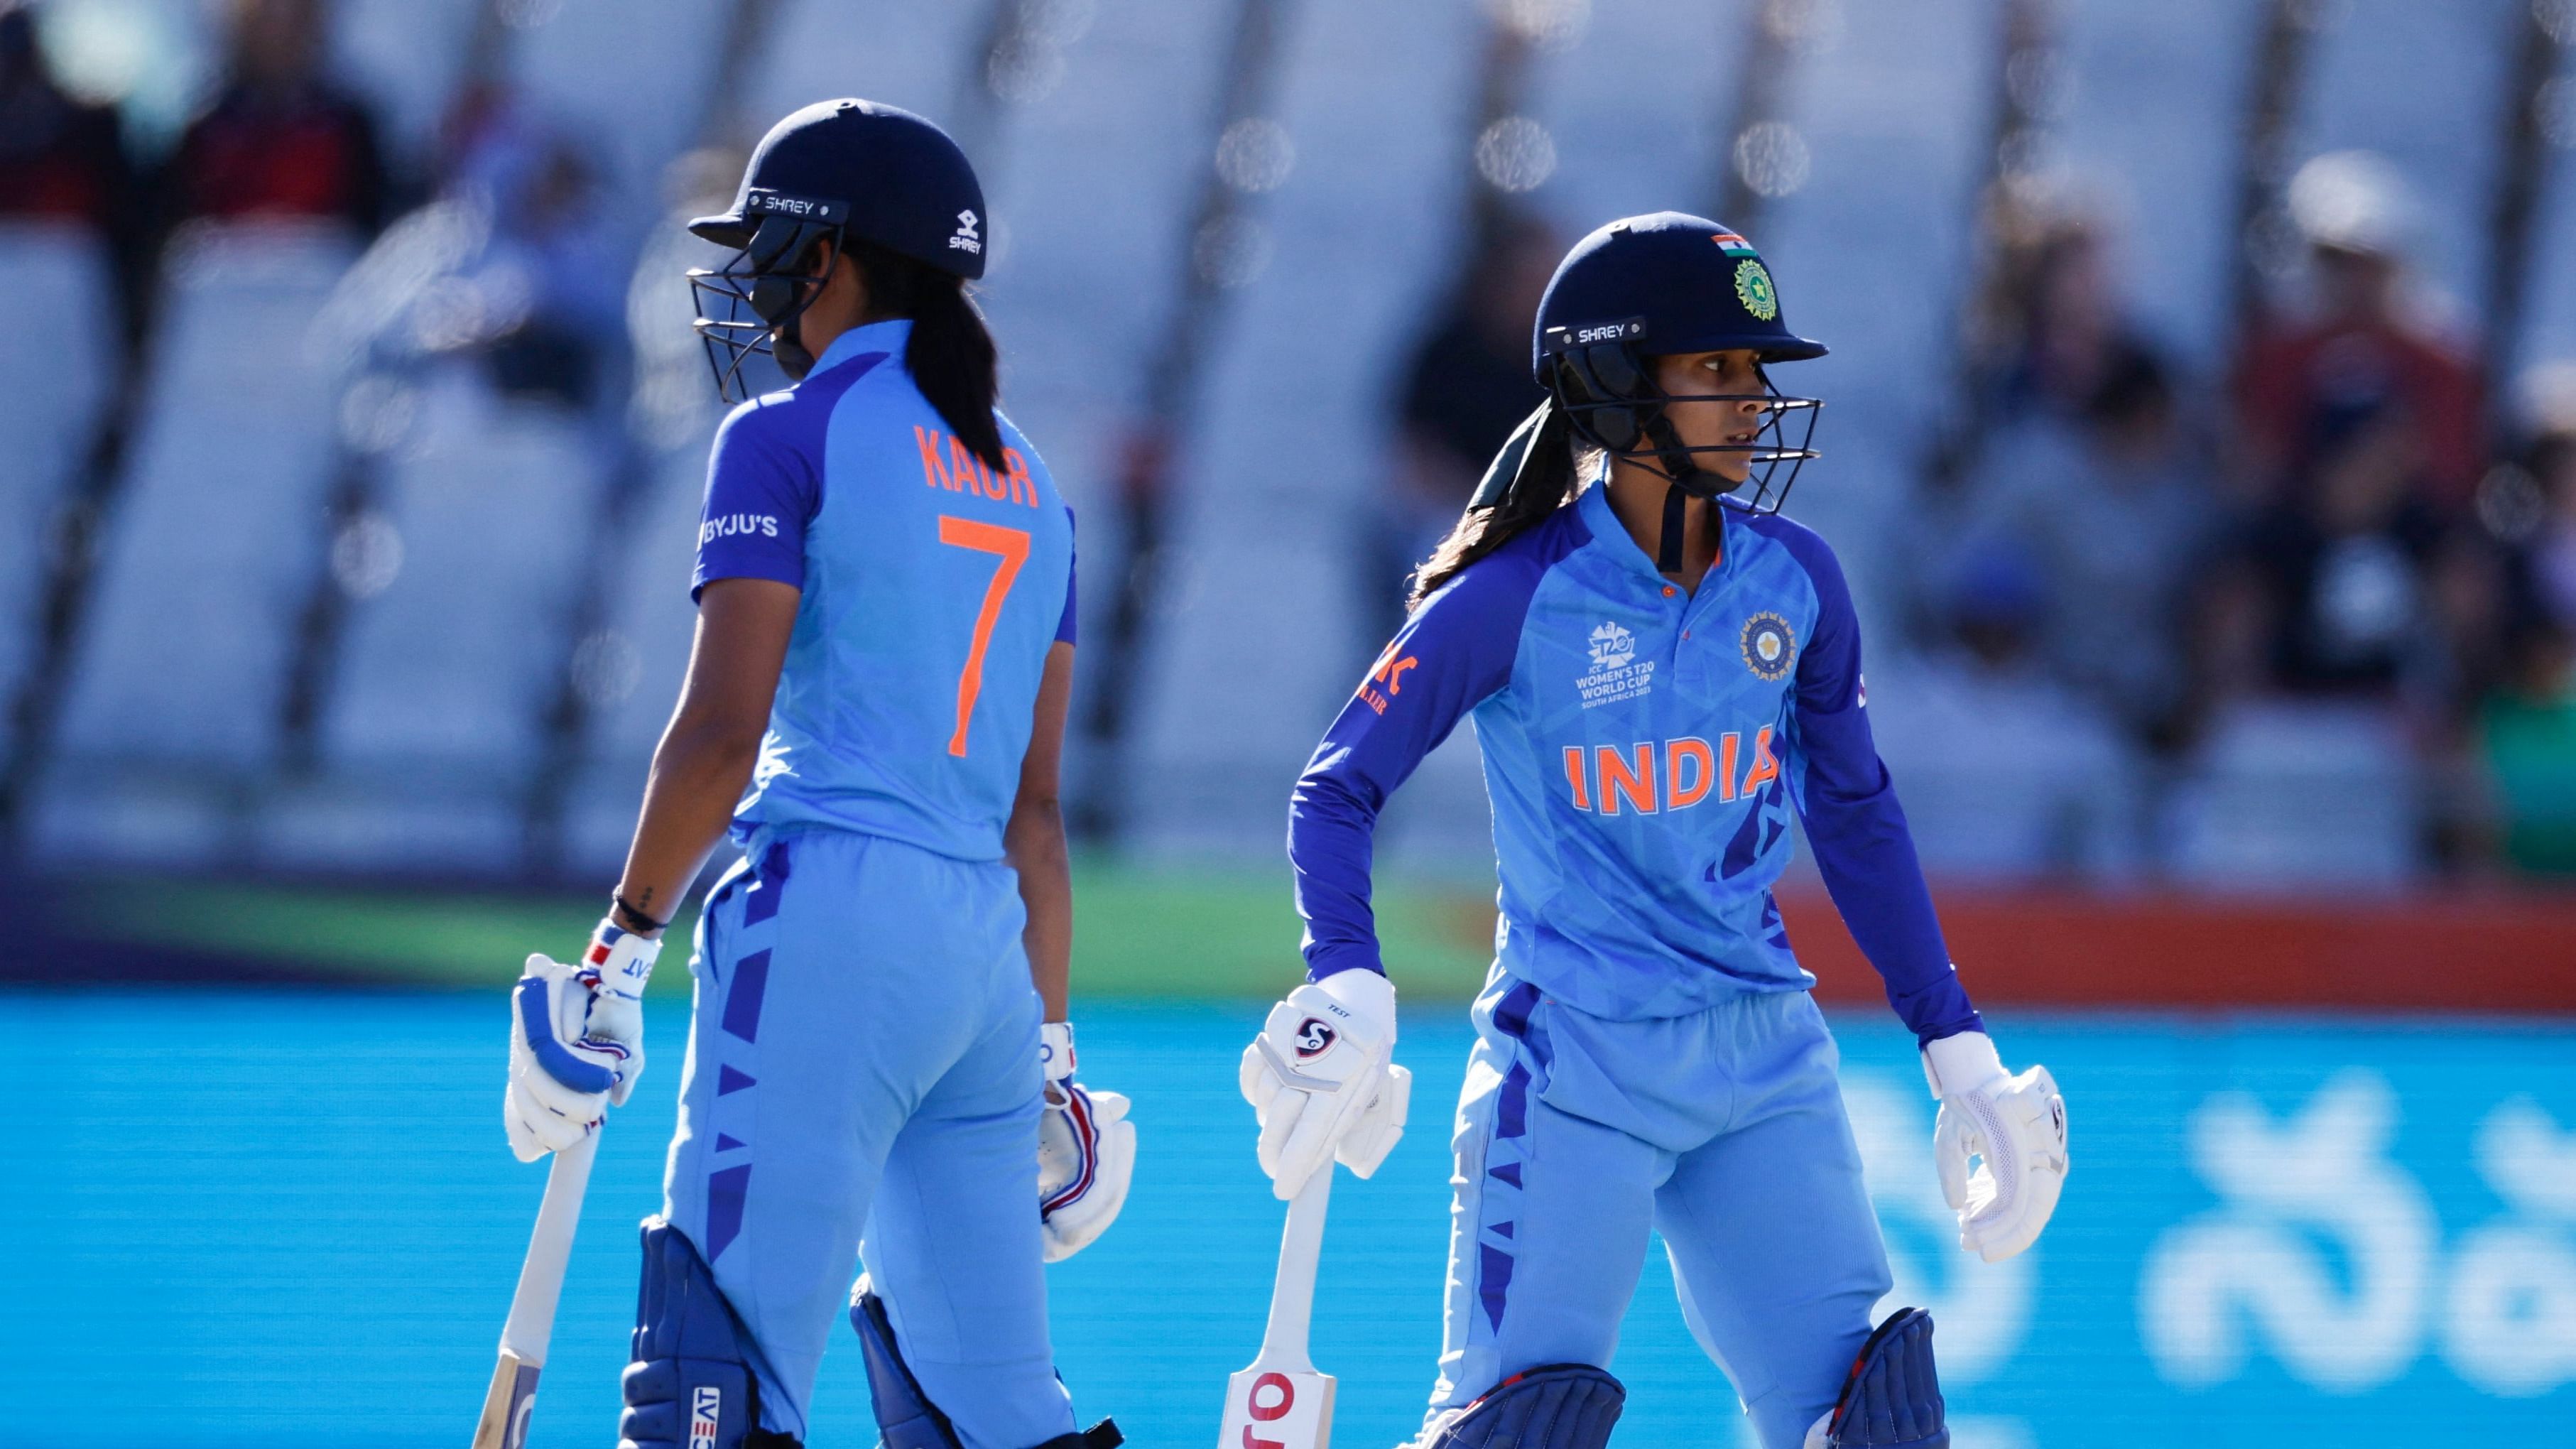 India's Harmanpreet Kaur (L) and India's Jemimah Rodrigues (R) stand on the pitch between overs during the semi-final T20 women's World Cup cricket match between Australia and India at Newlands Stadium in Cape Town on February 23, 2023. Credit: AFP Photo